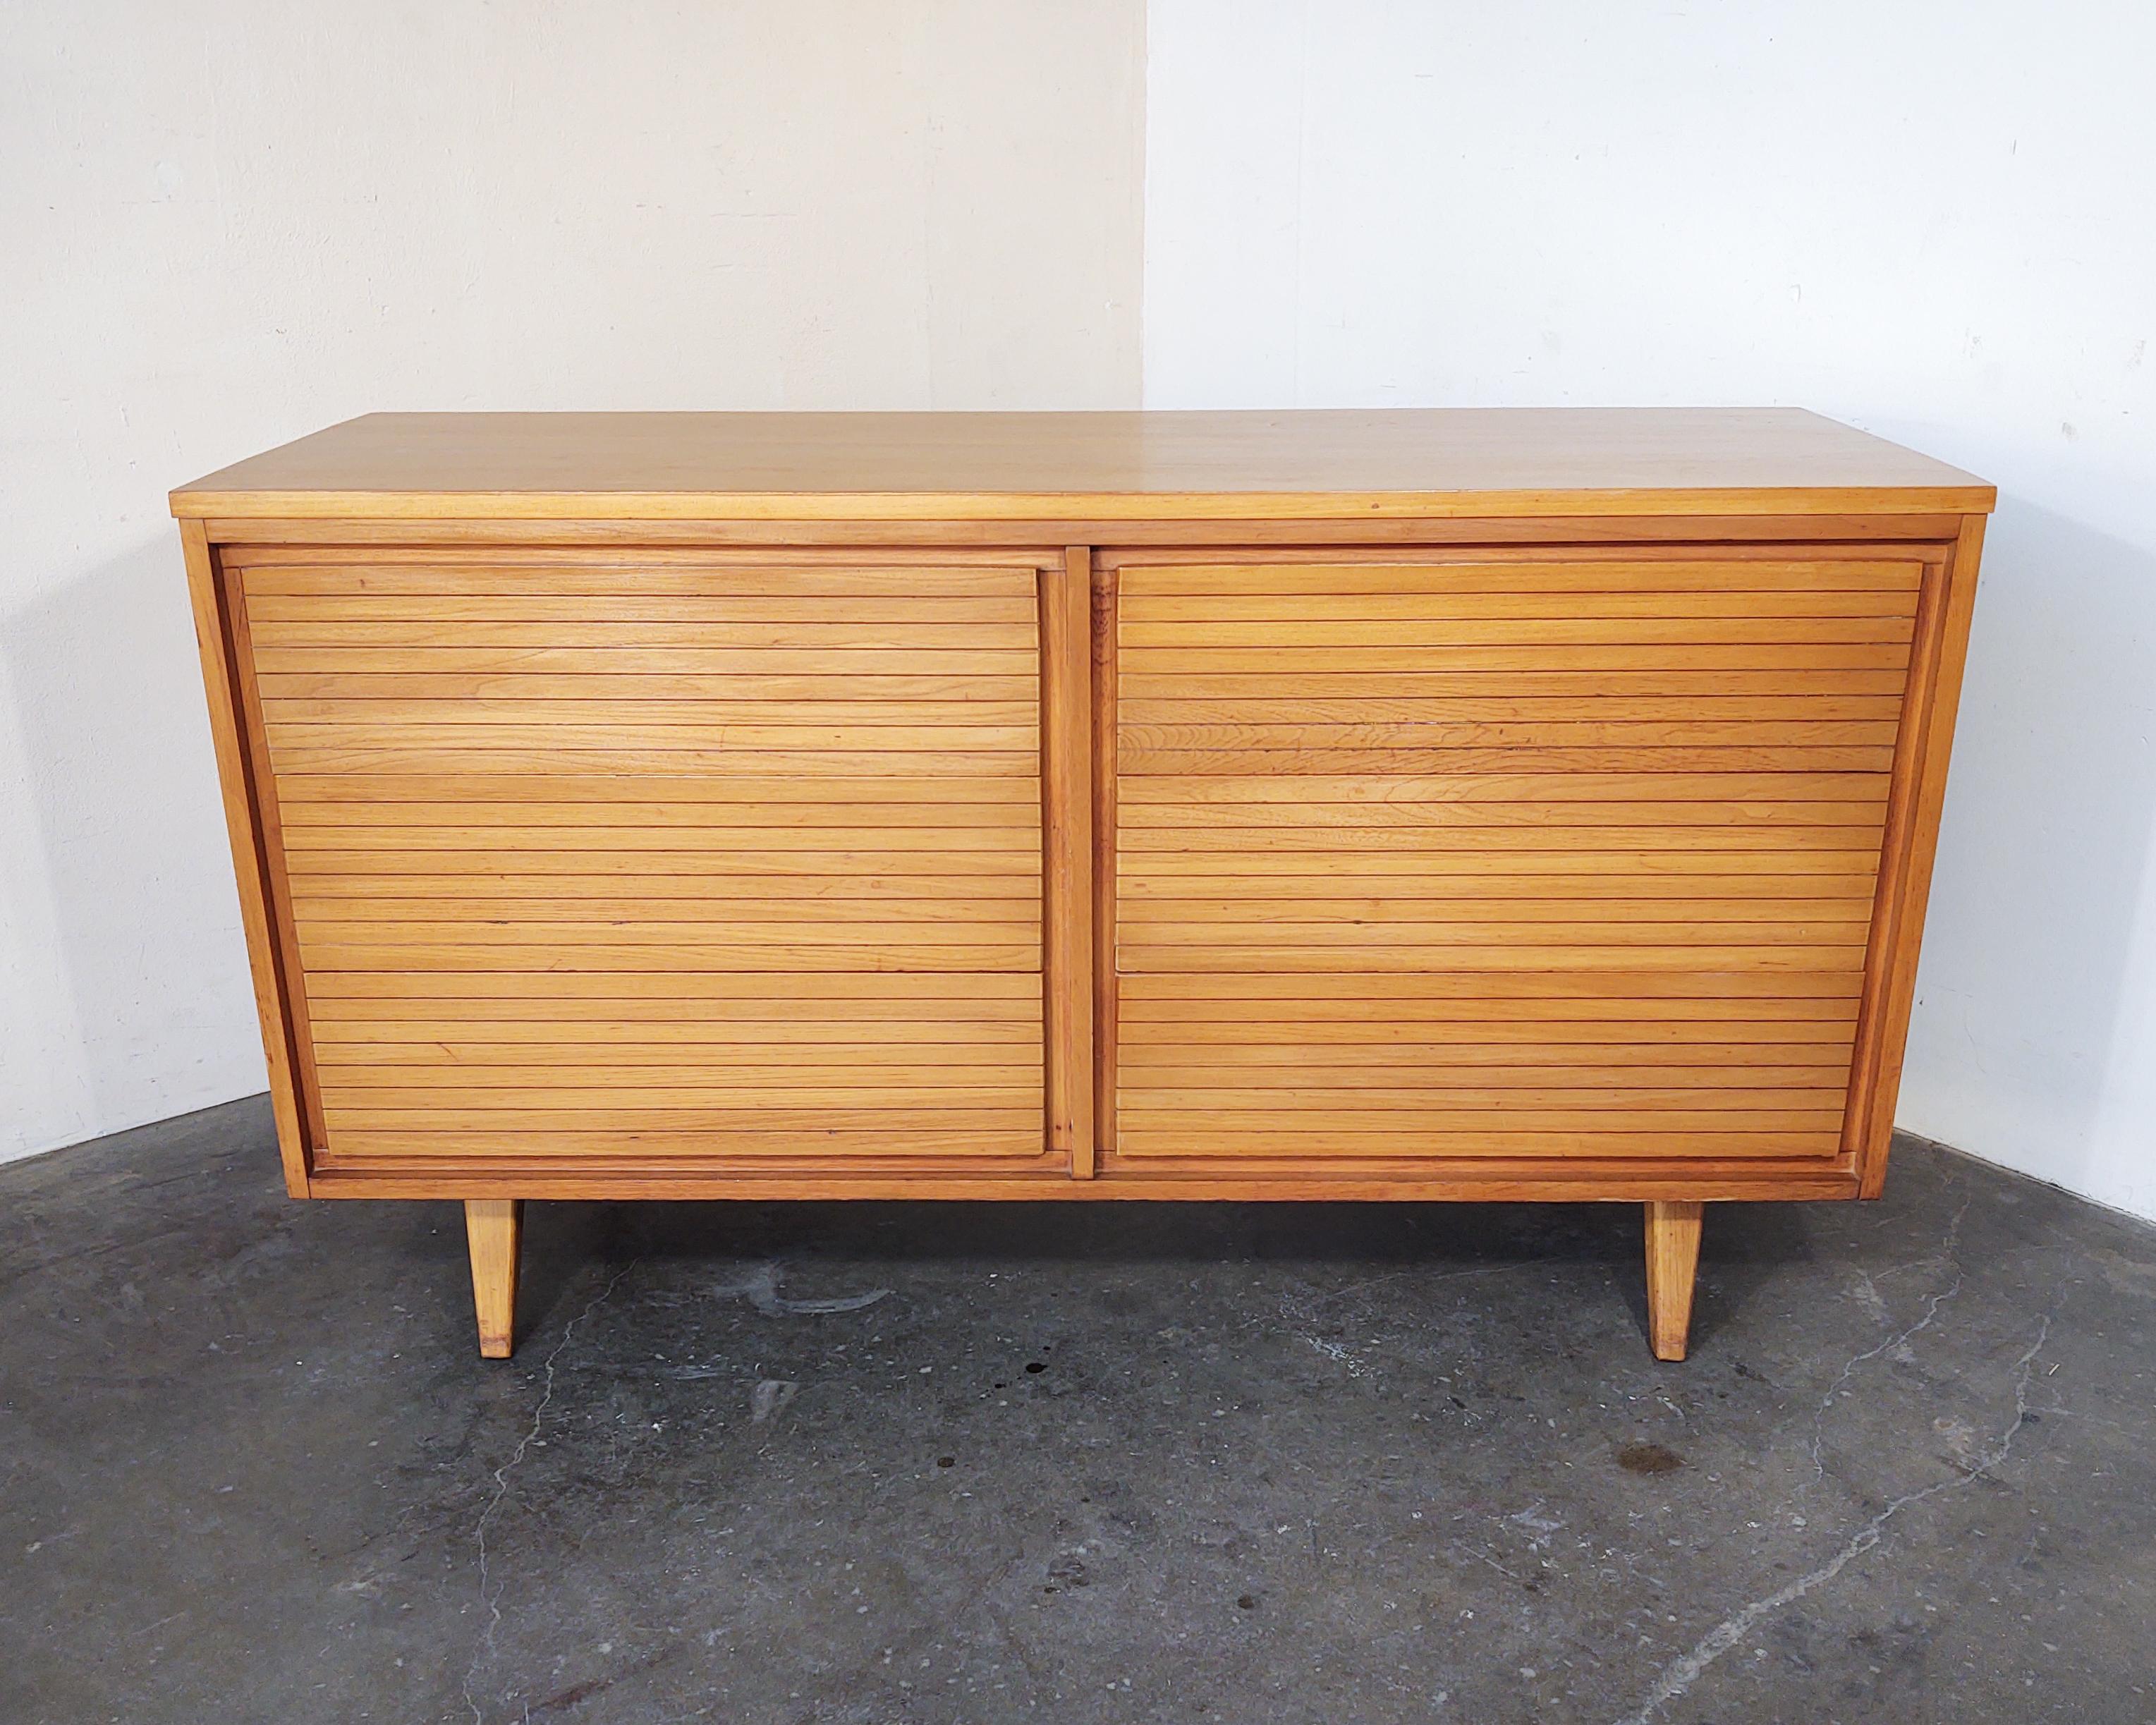 Beautiful solid elm dresser circa late 1950s/early 60s. Six solid maple drawers with dovetail joinery and engraved horizontal lines detail. Overall great condition, some light wear throughout consistent with vintage age.

Measures: